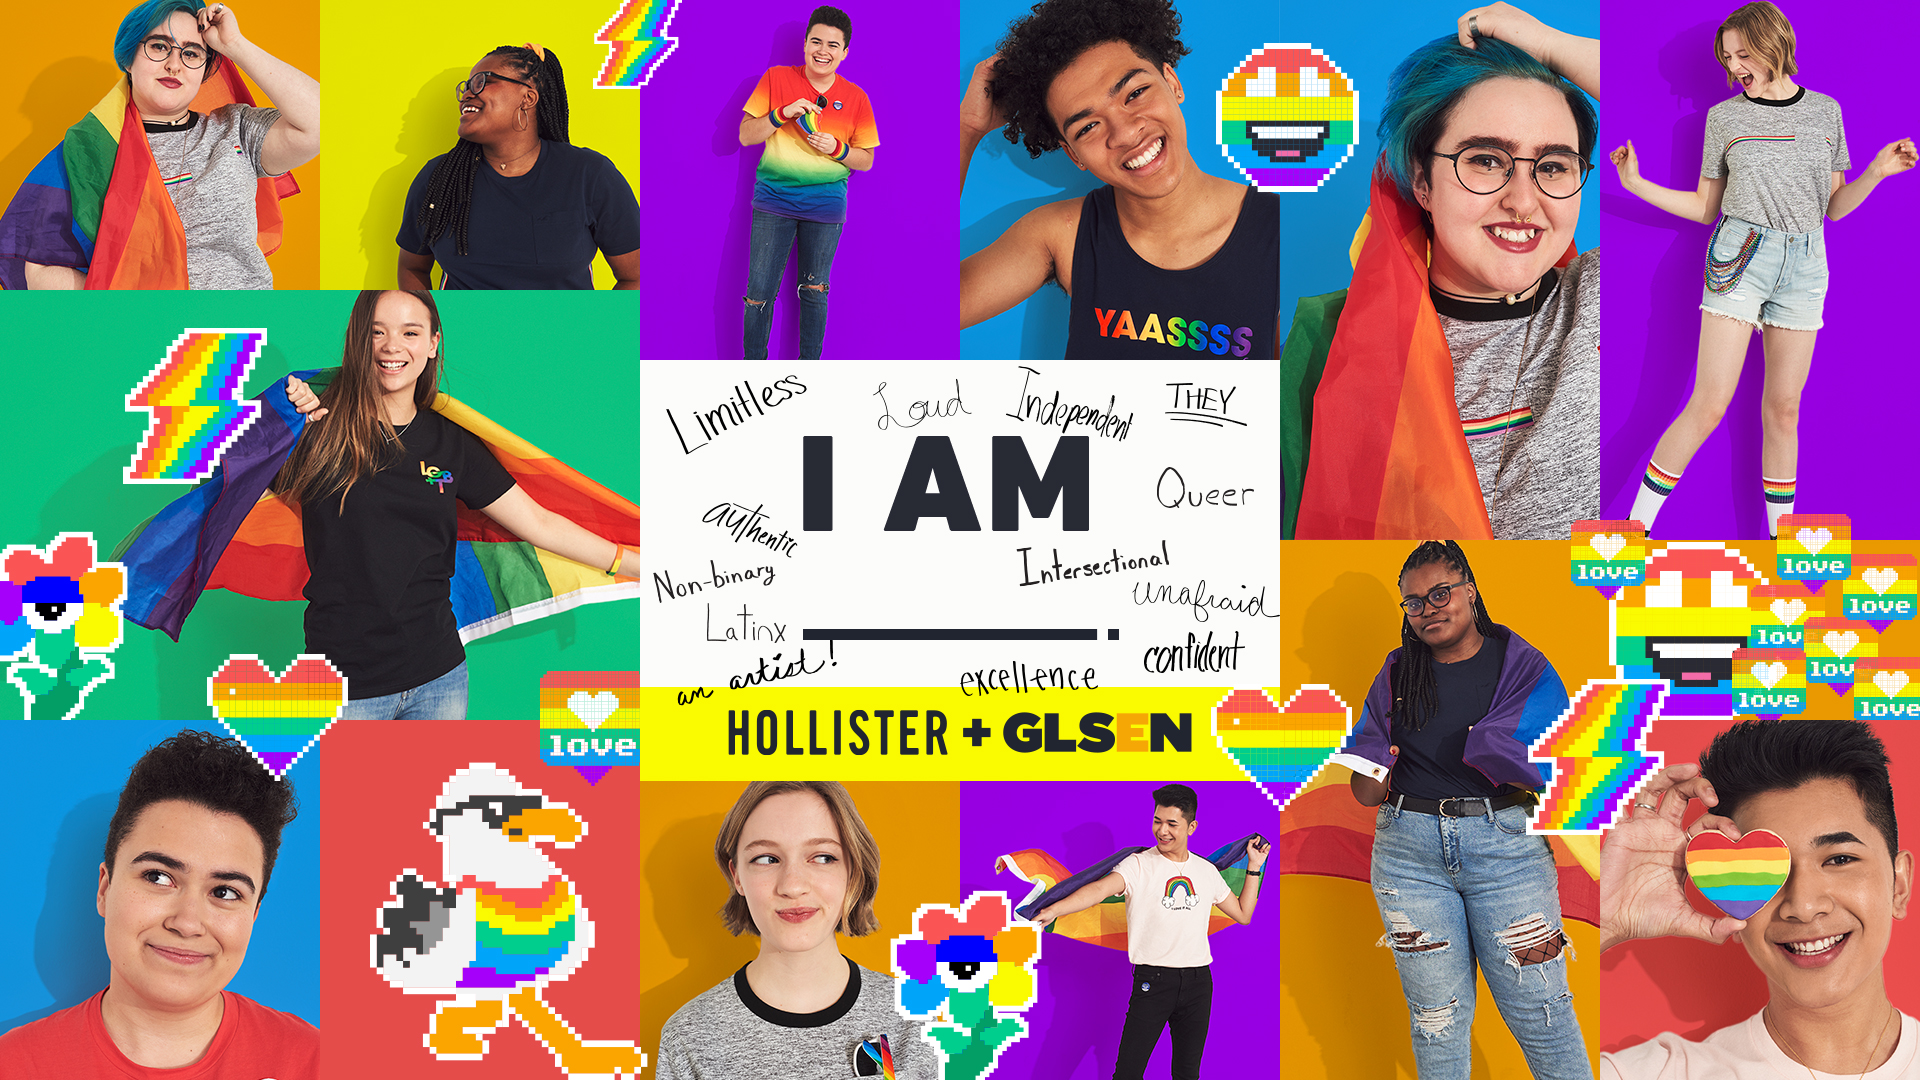 Hollister + GLSEN Pride Guide – J.THEISS